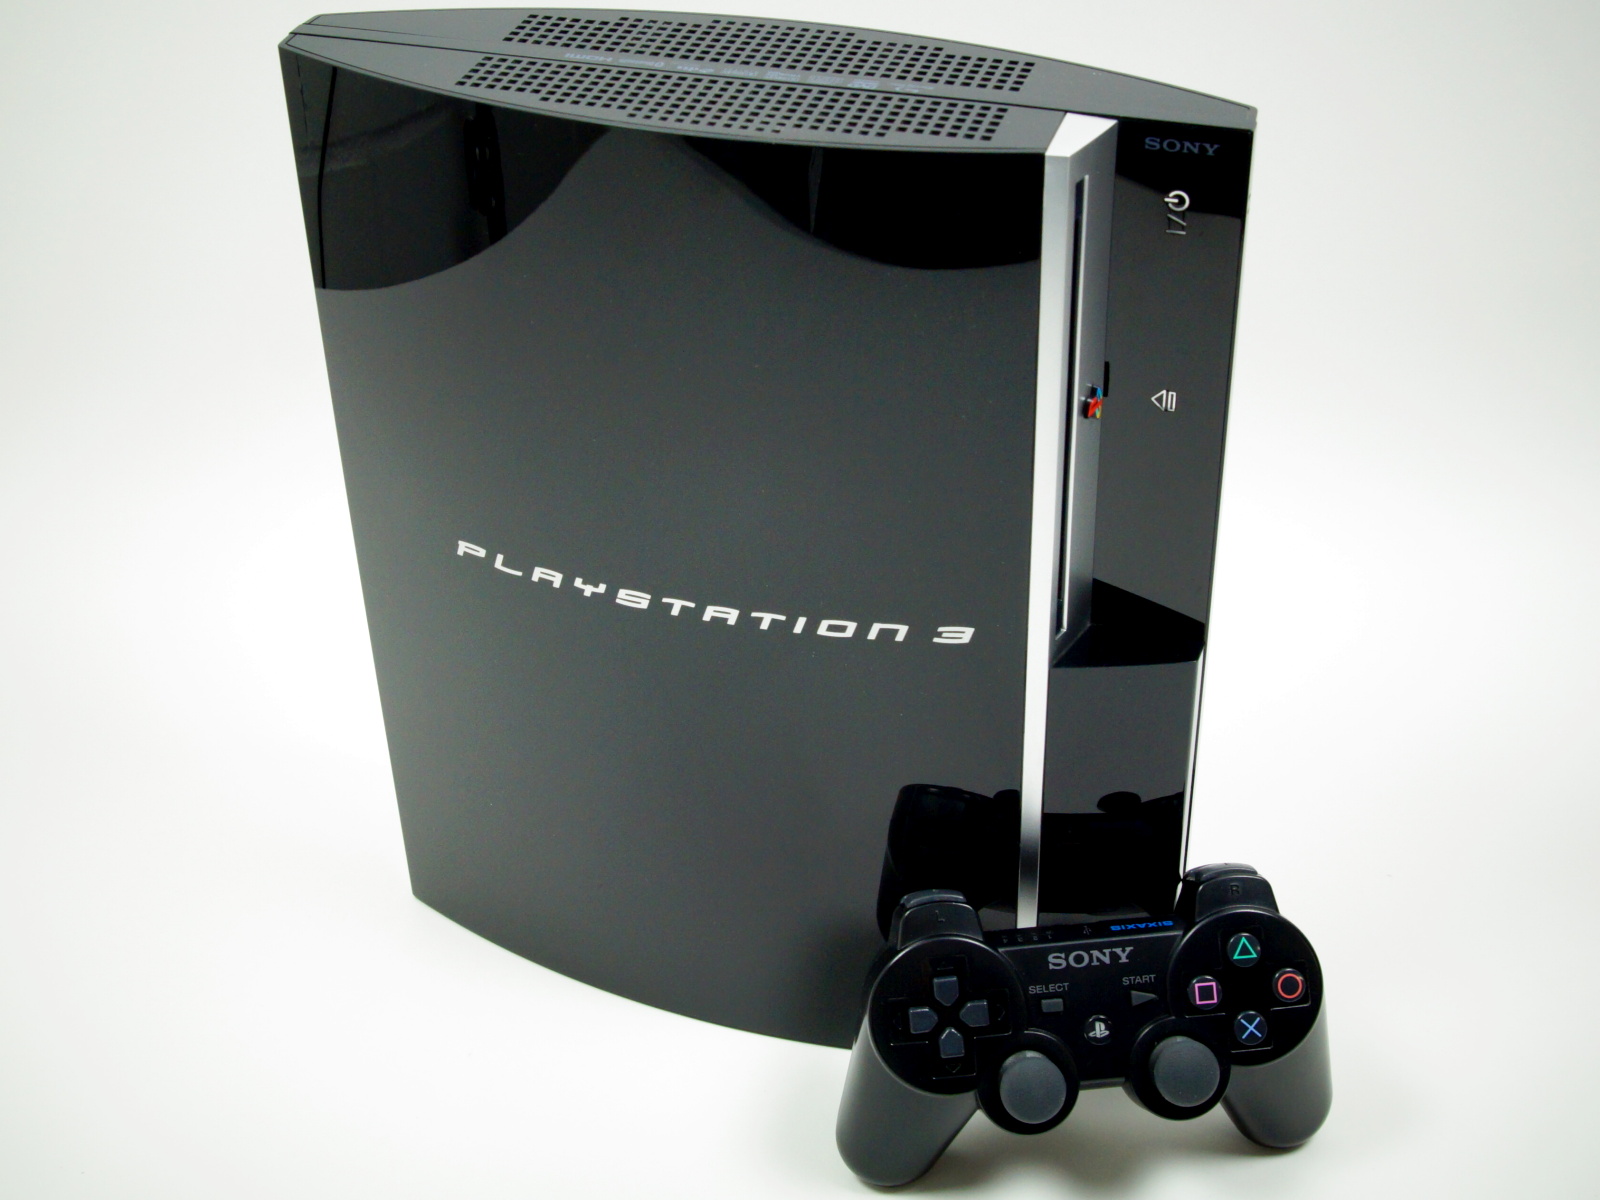 file-sony-playstation-ps3-superslim-console-bl-jpg-wikimedia-commons